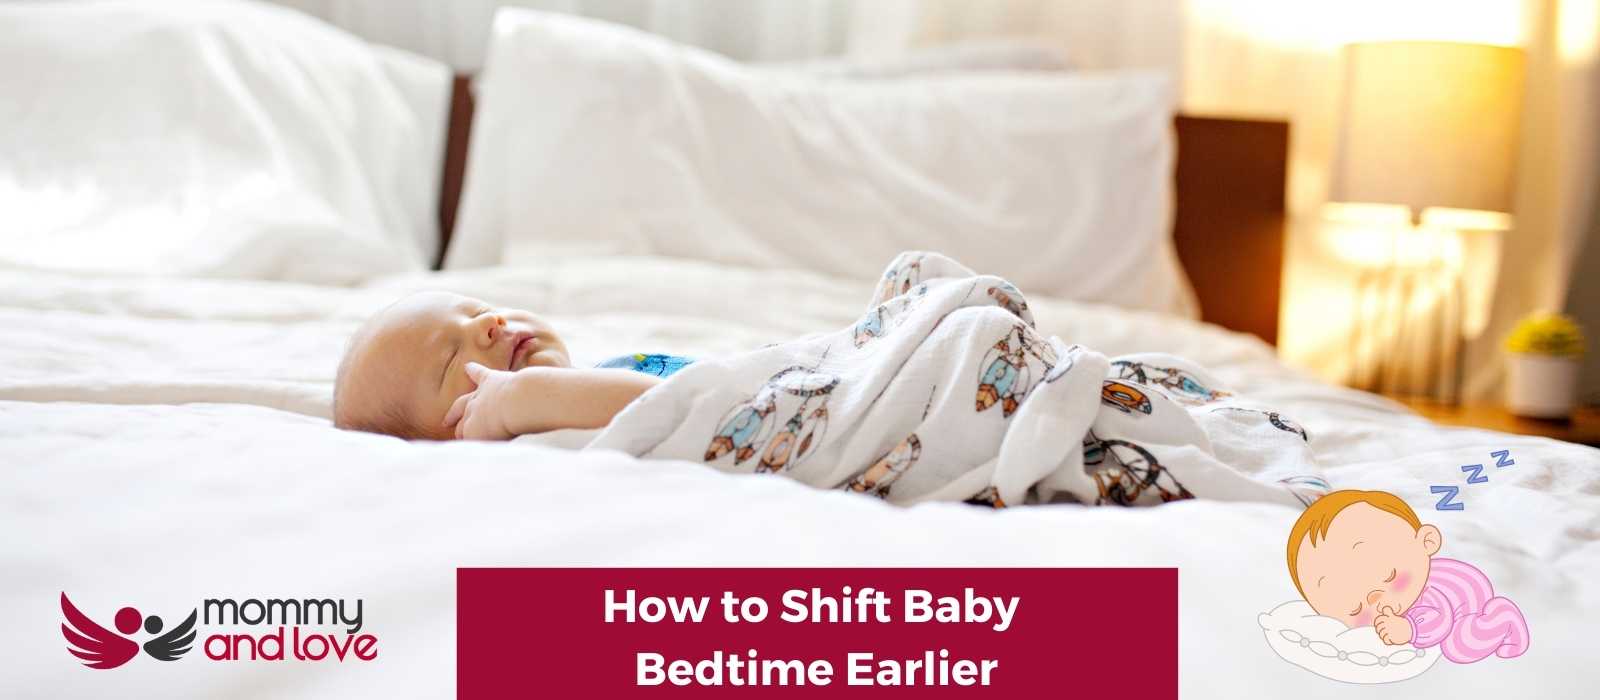 How to Shift Baby Bedtime Earlier